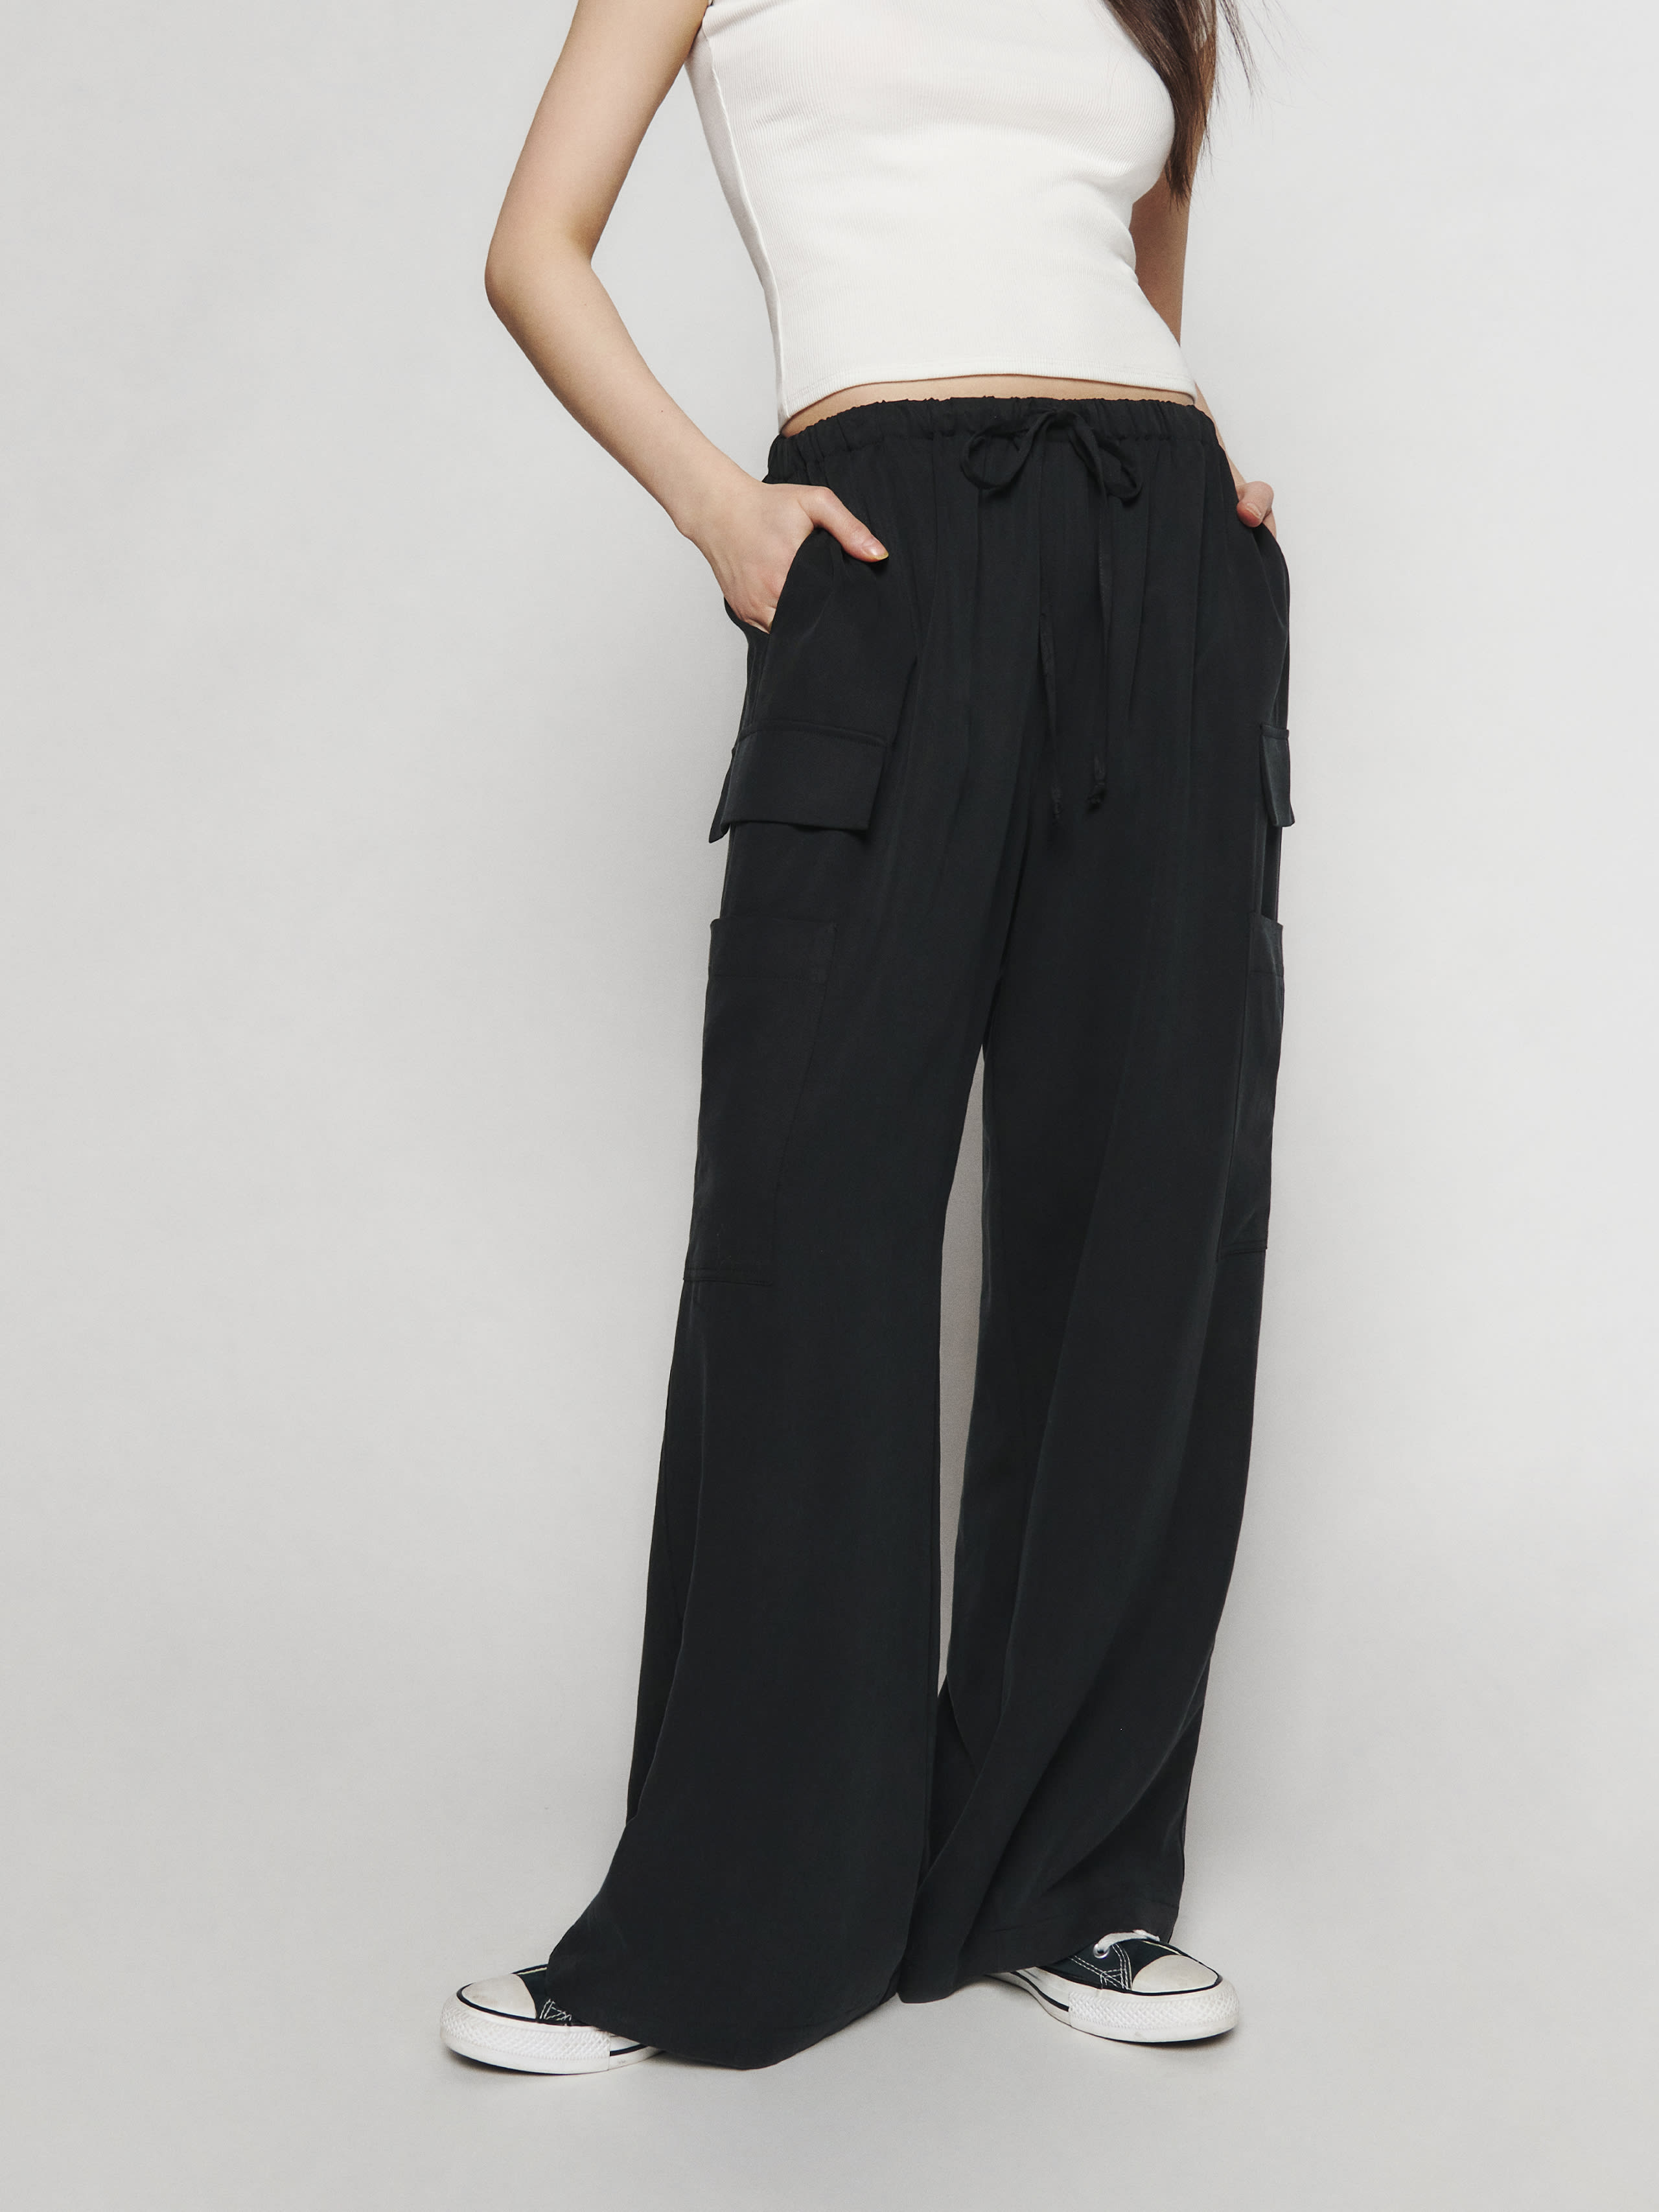 Reformation Petites Ethan Twill Pant In Black